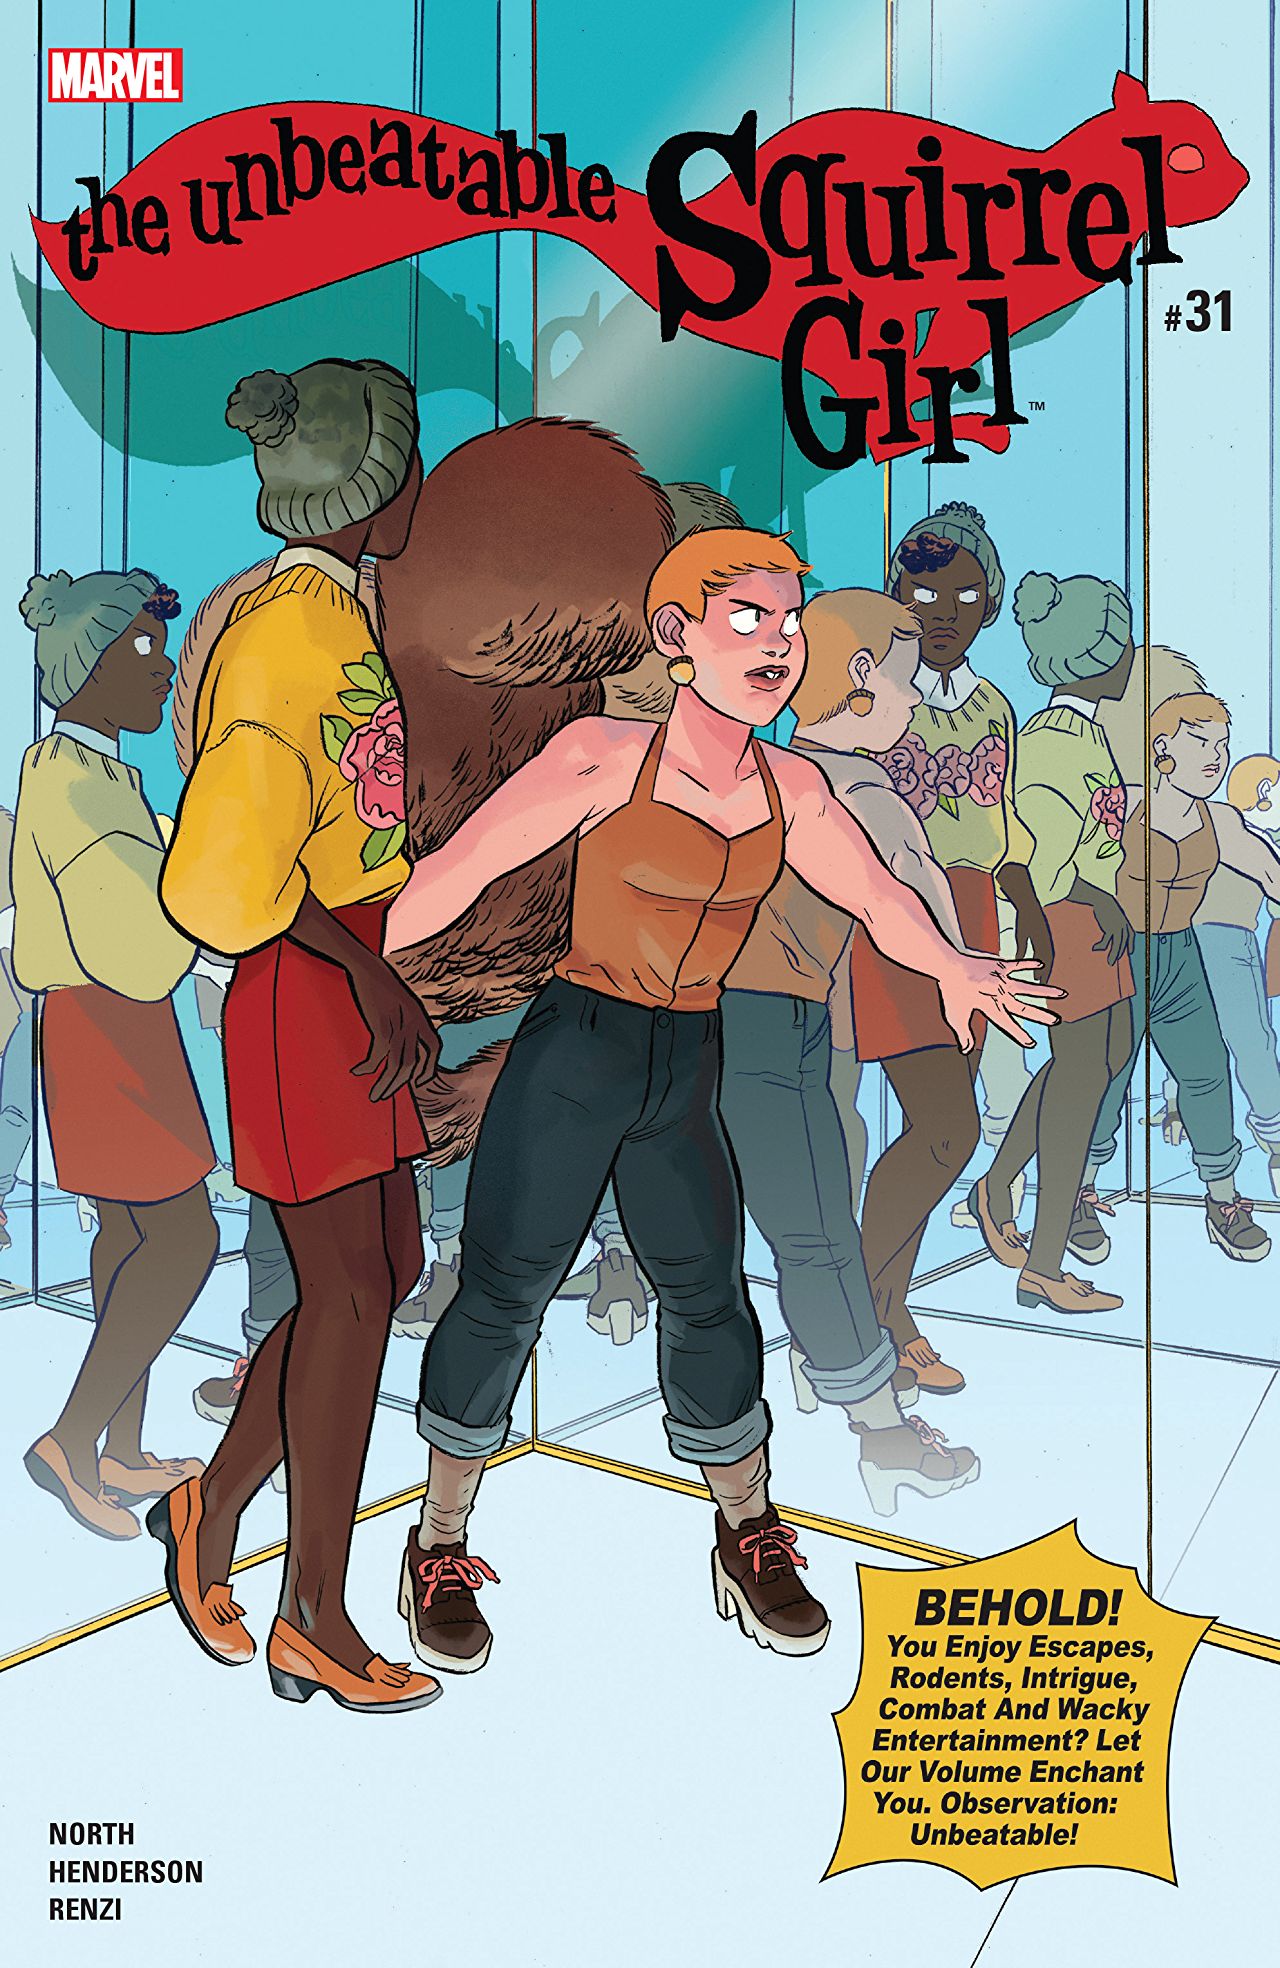 The Unbeatable Squirrel Girl #31: A lifetime lived well